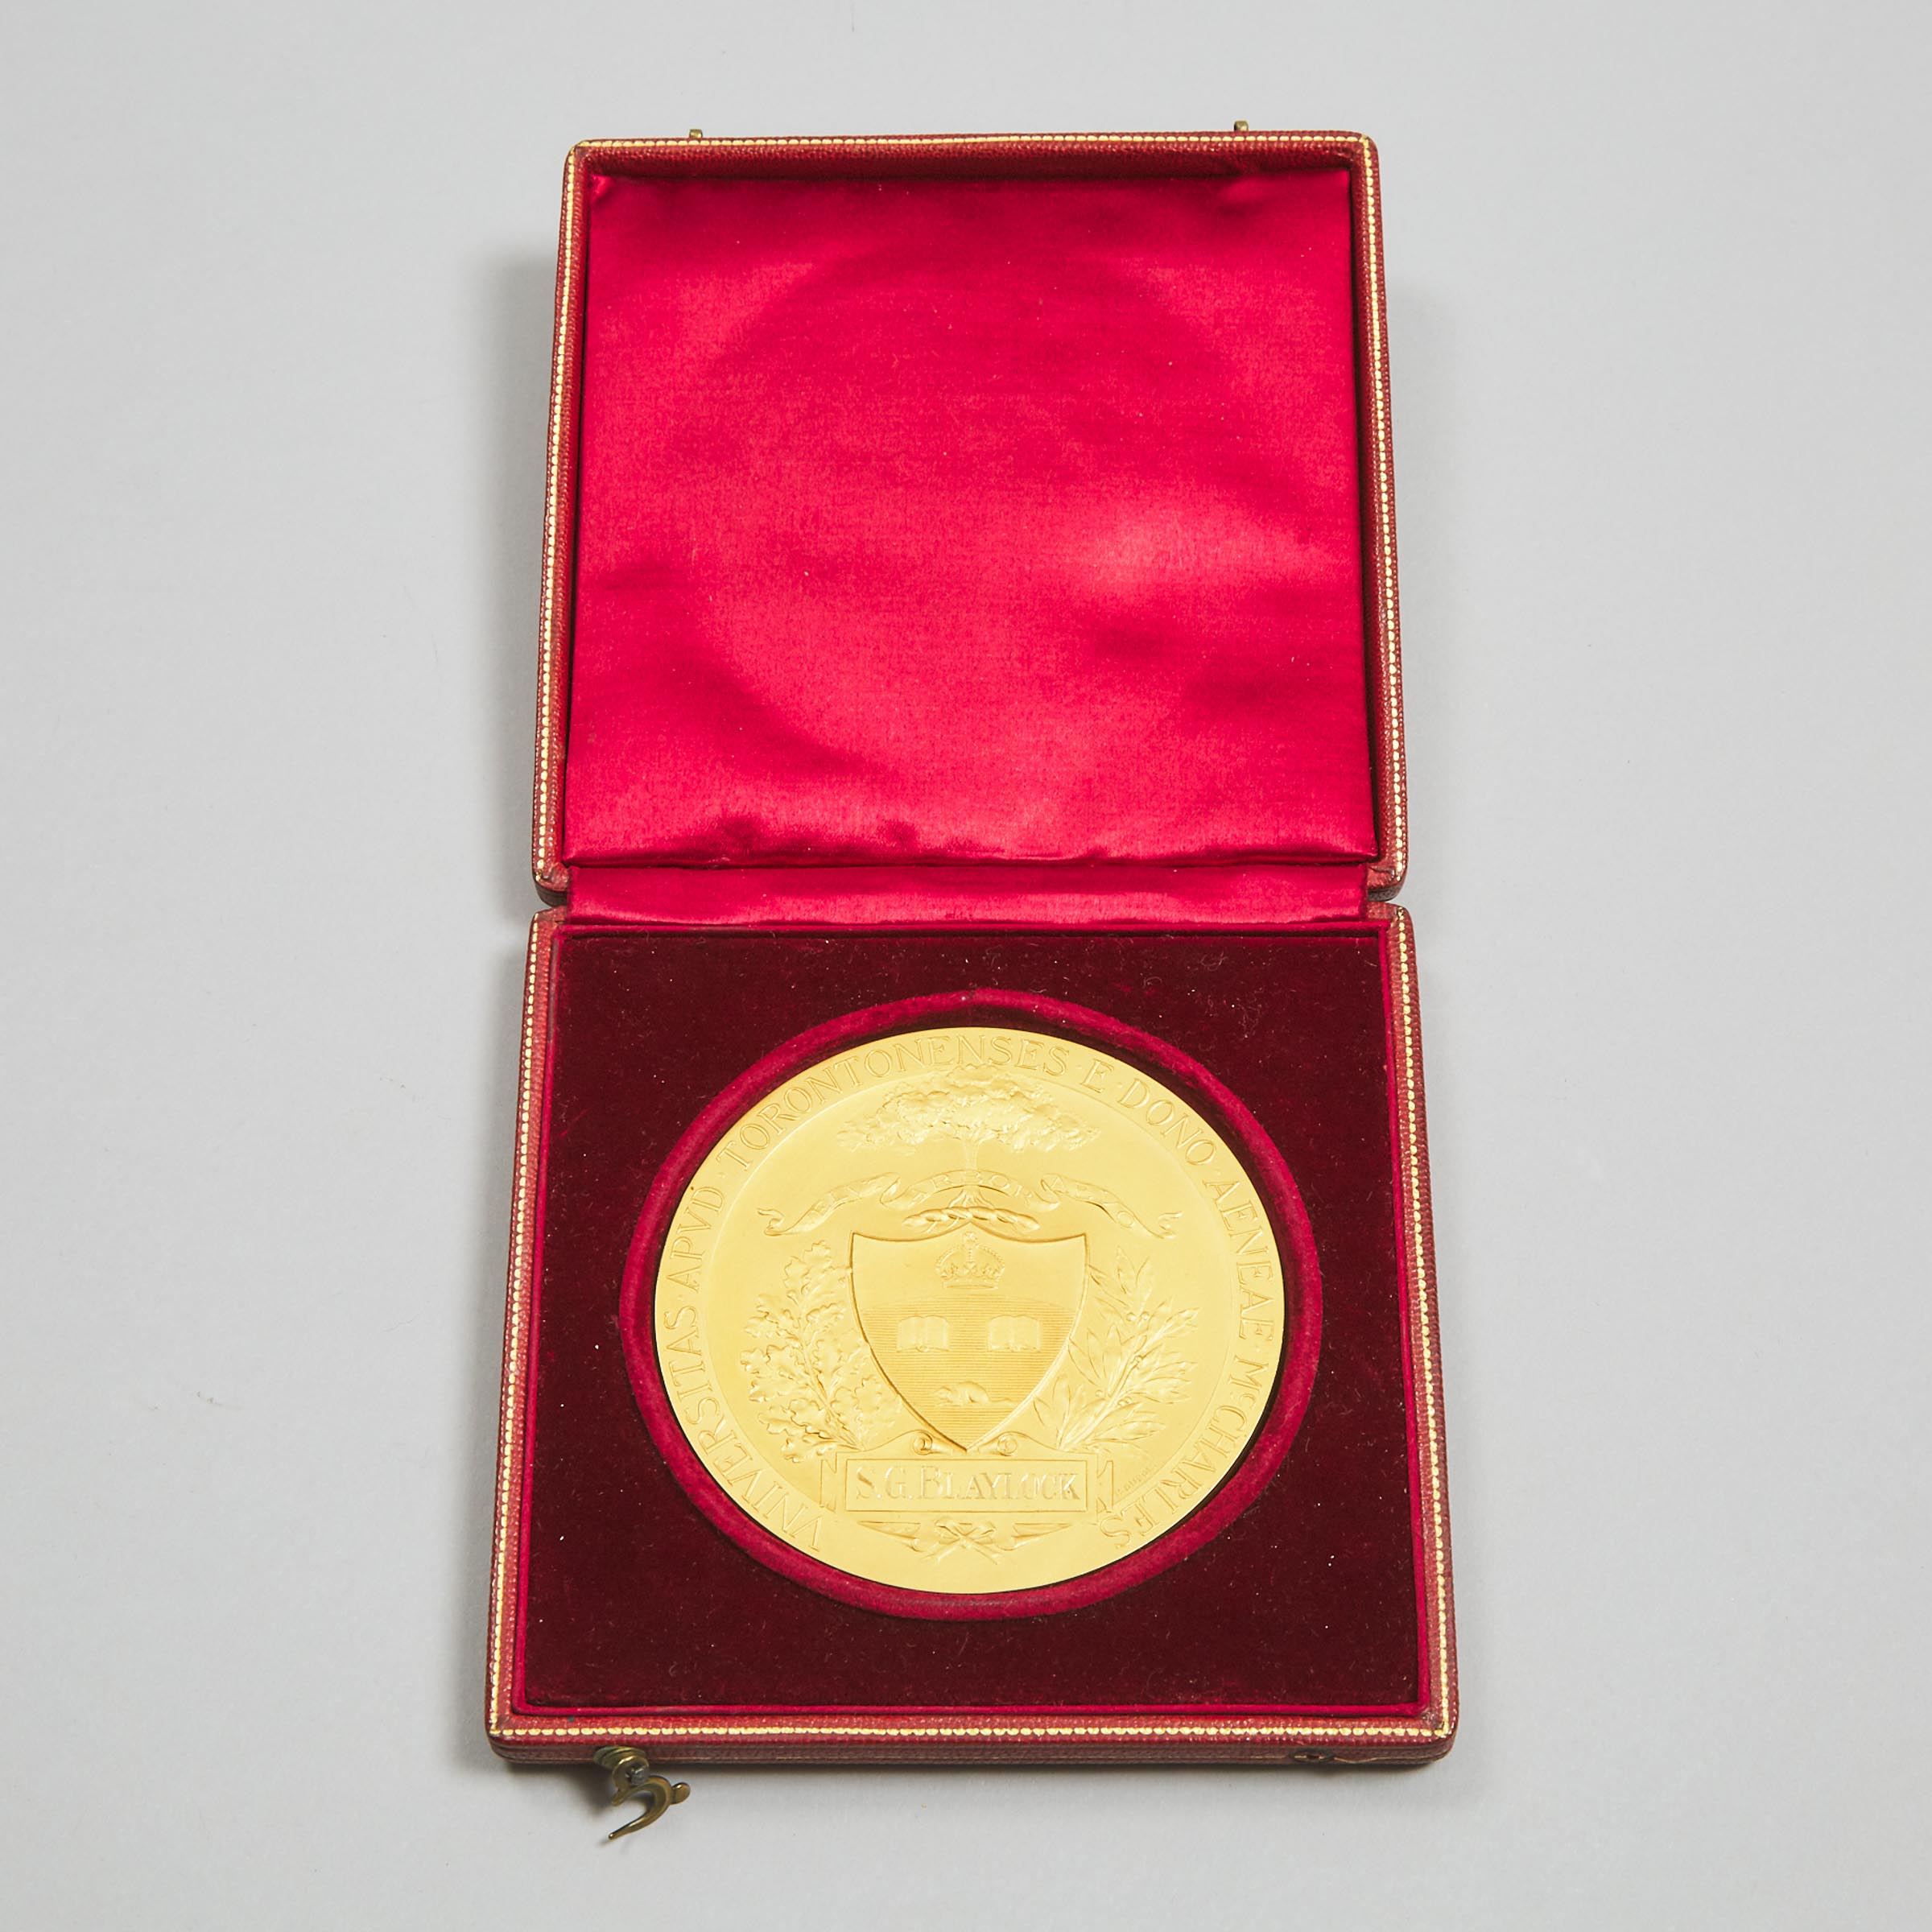 Gold Medal to Selwyn Gwillym Blaylock: University of Toronto McCharles Award for Outstanding Work in Canadian Metallurgy, 1924